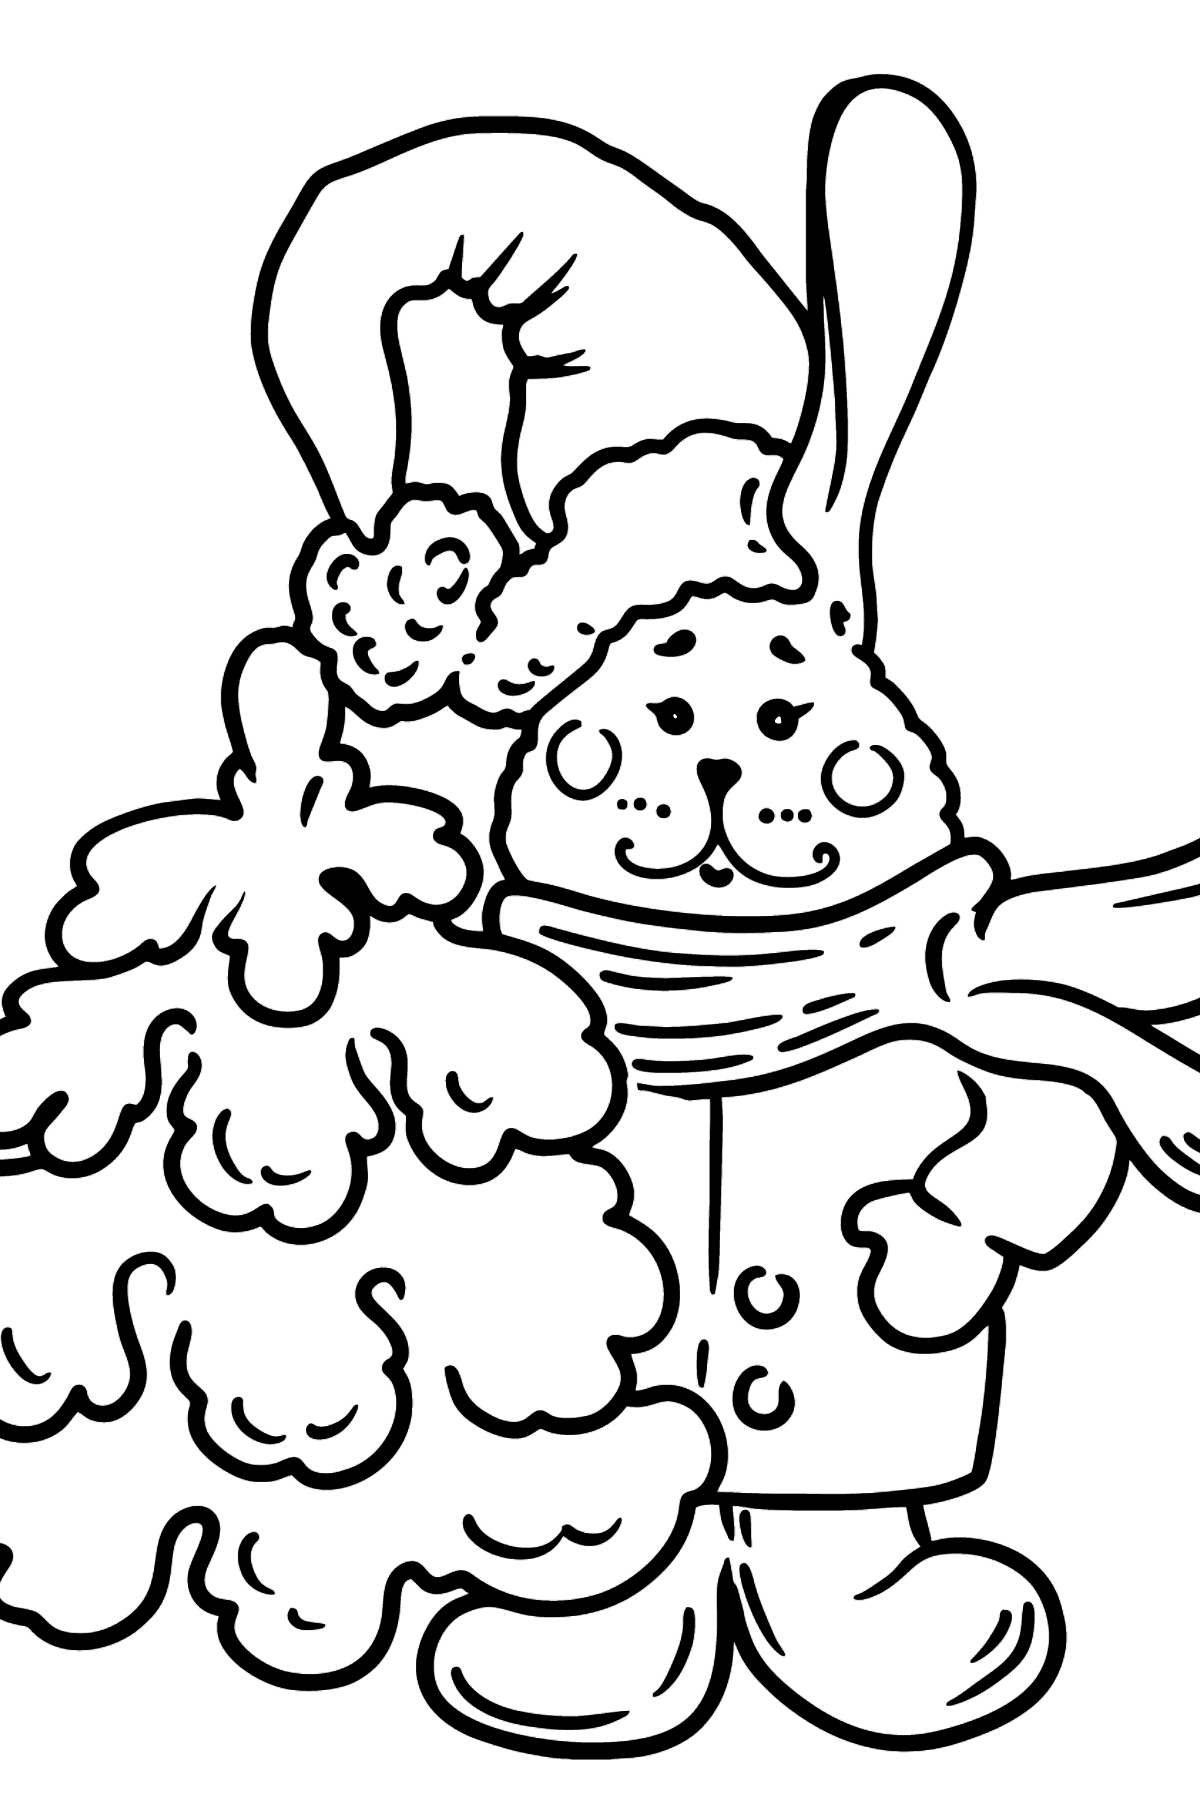 Christmas Bunny coloring page - Coloring Pages for Kids